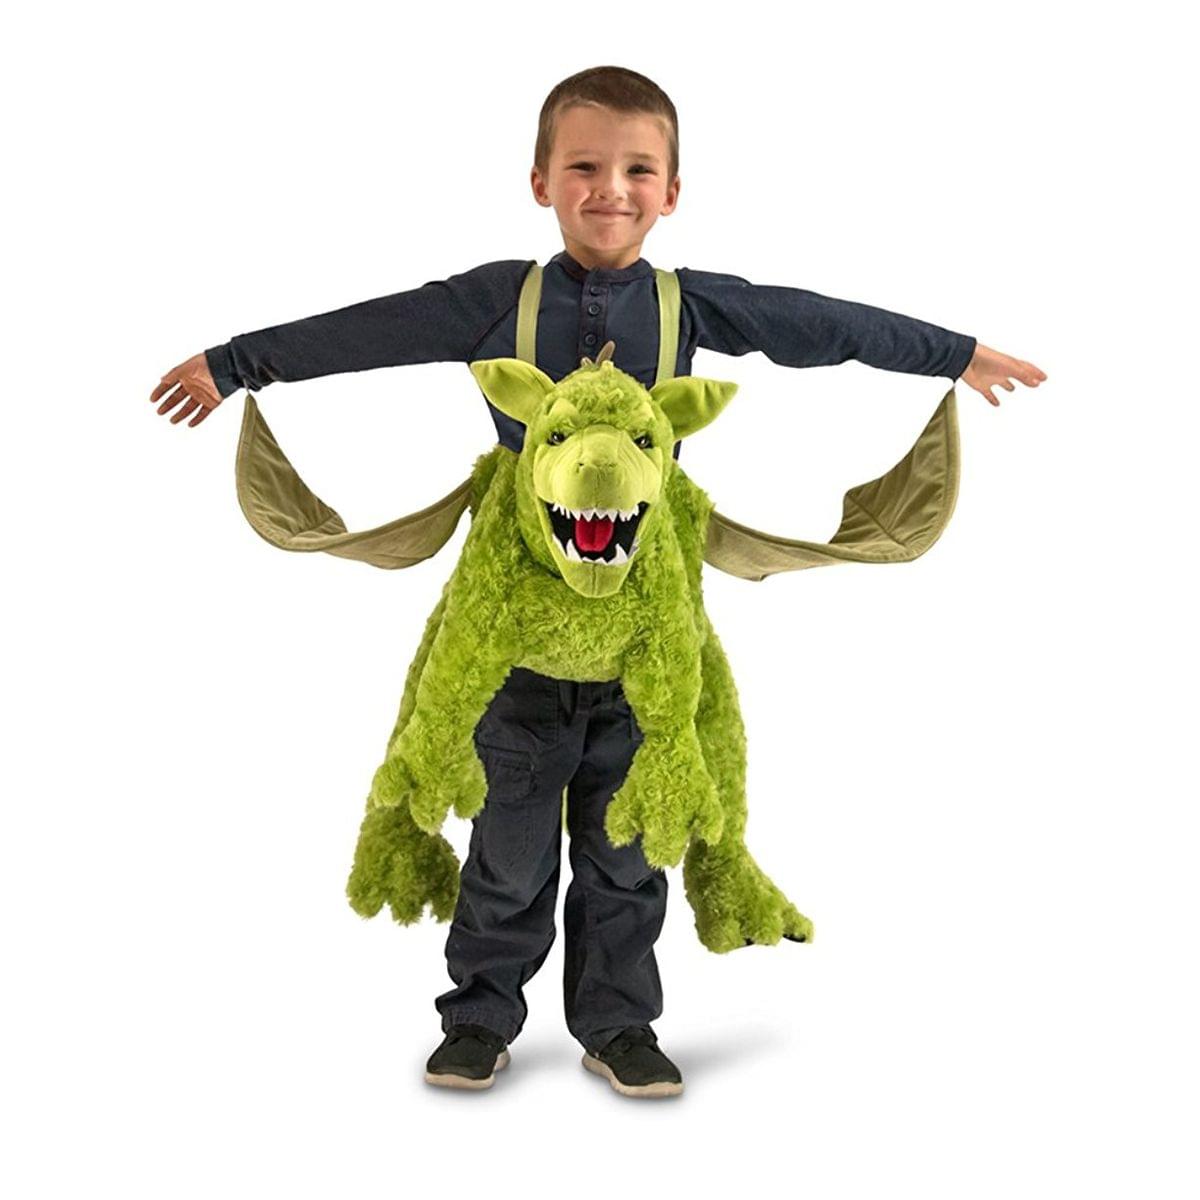 Green Ride-In Dragon One Size Fits Most Child Costume